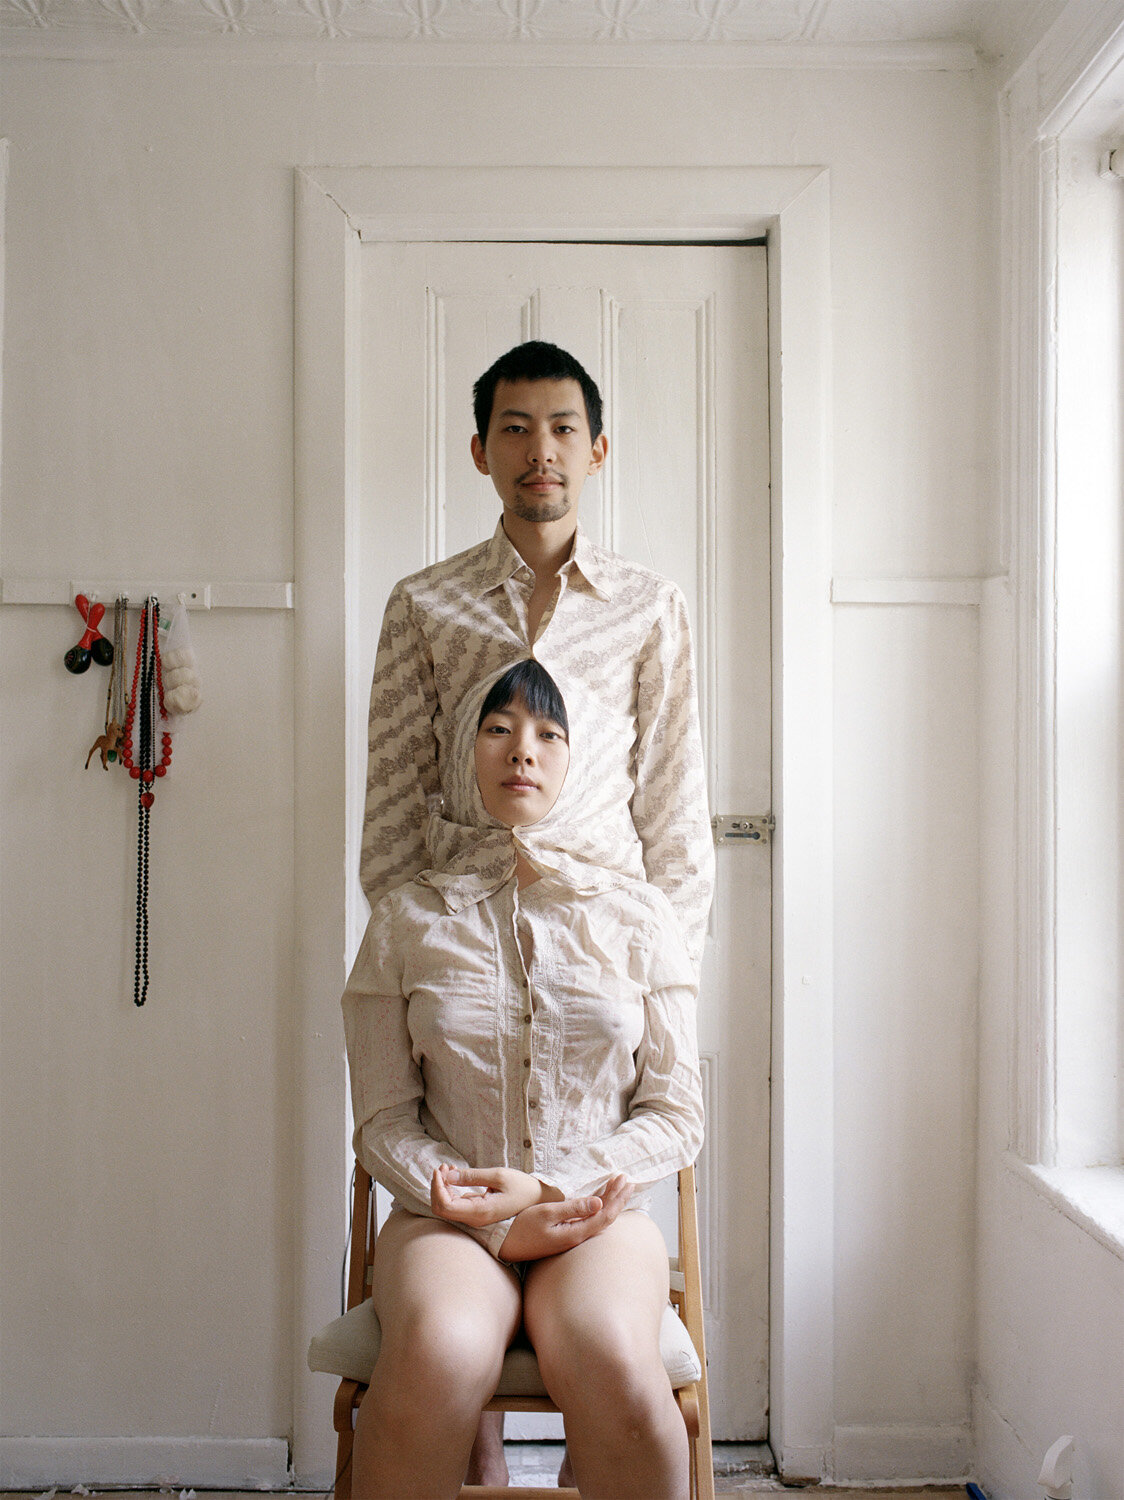 Pixy Liao participates in a group exhibition “We’re Home”at the Pace University Art Gallery